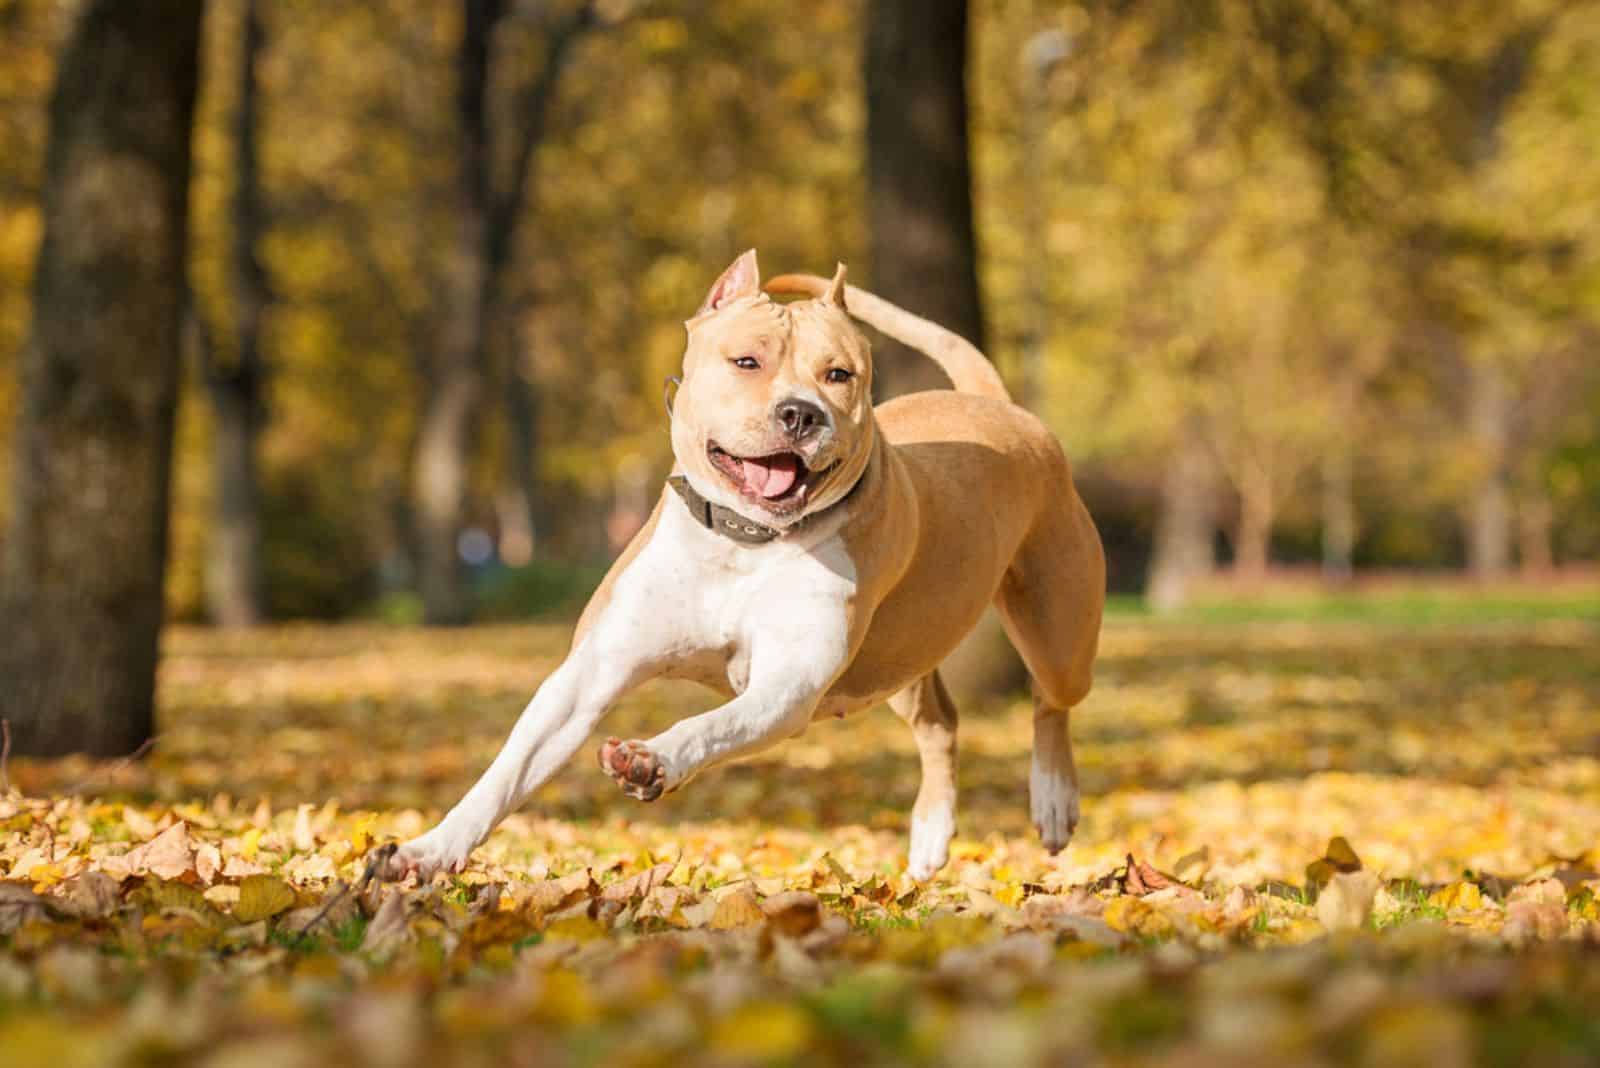 American staffordshire terrier playing in the park in autumn